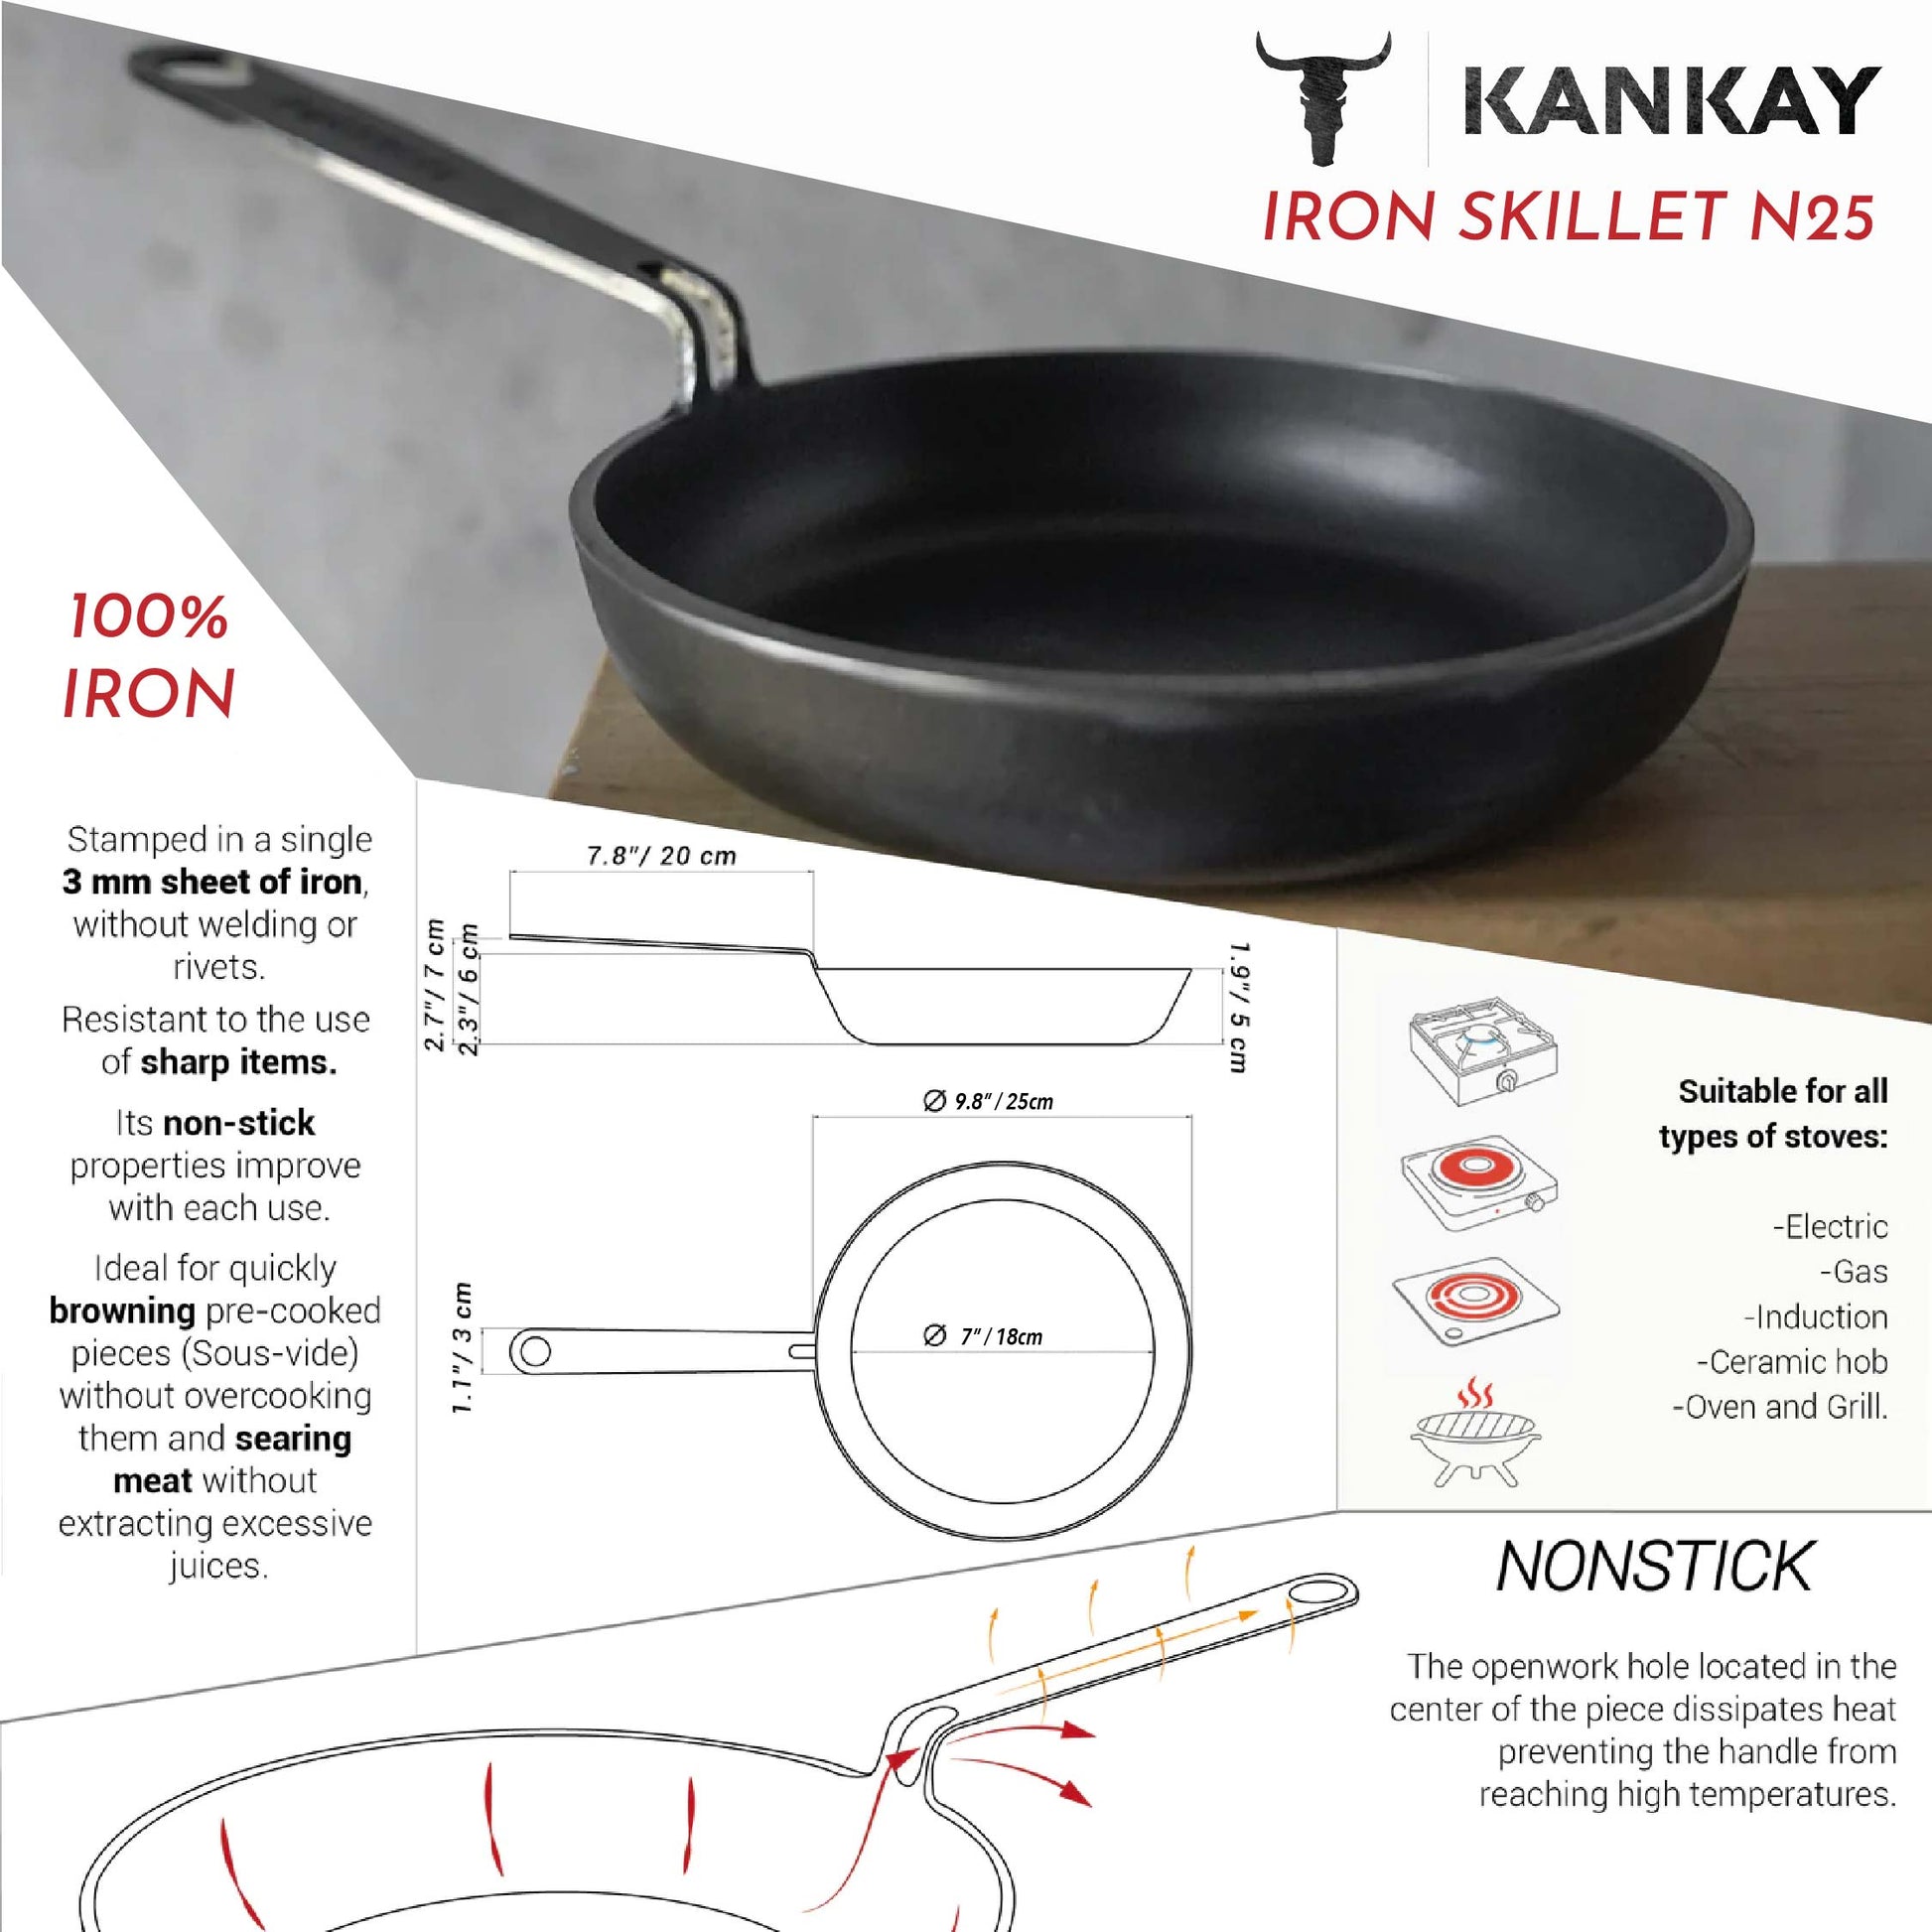 The BK Carbon Steel Skillet Is on Sale for $30 at